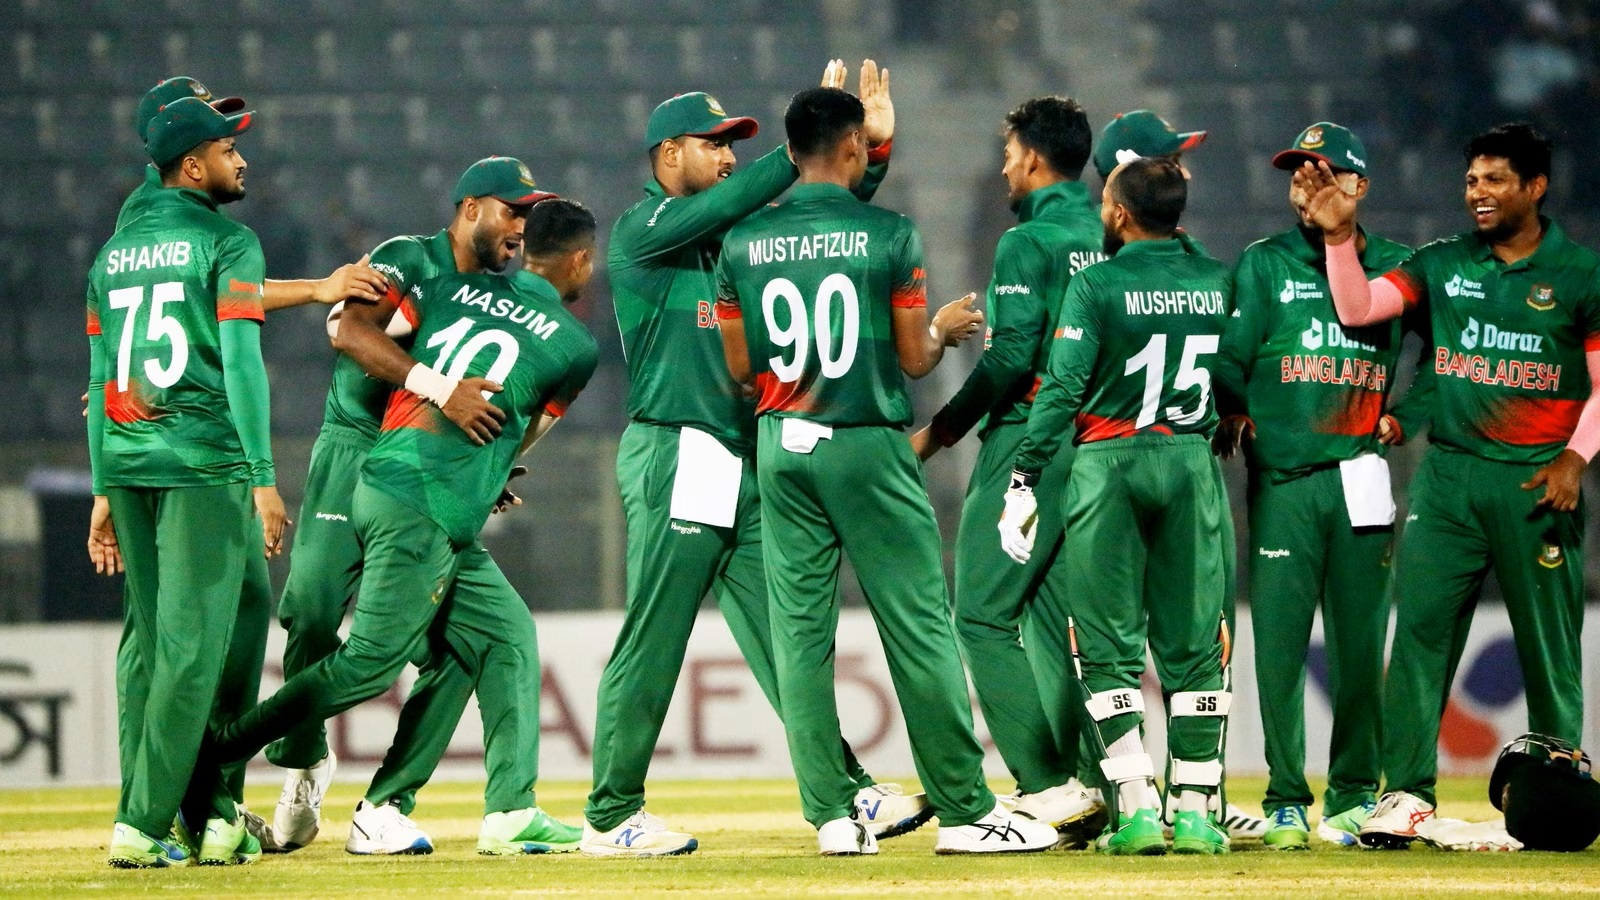 Bangladesh has announced their 15-member squad for the 2023 World Cup, with the notable omission of Tamim Iqbal